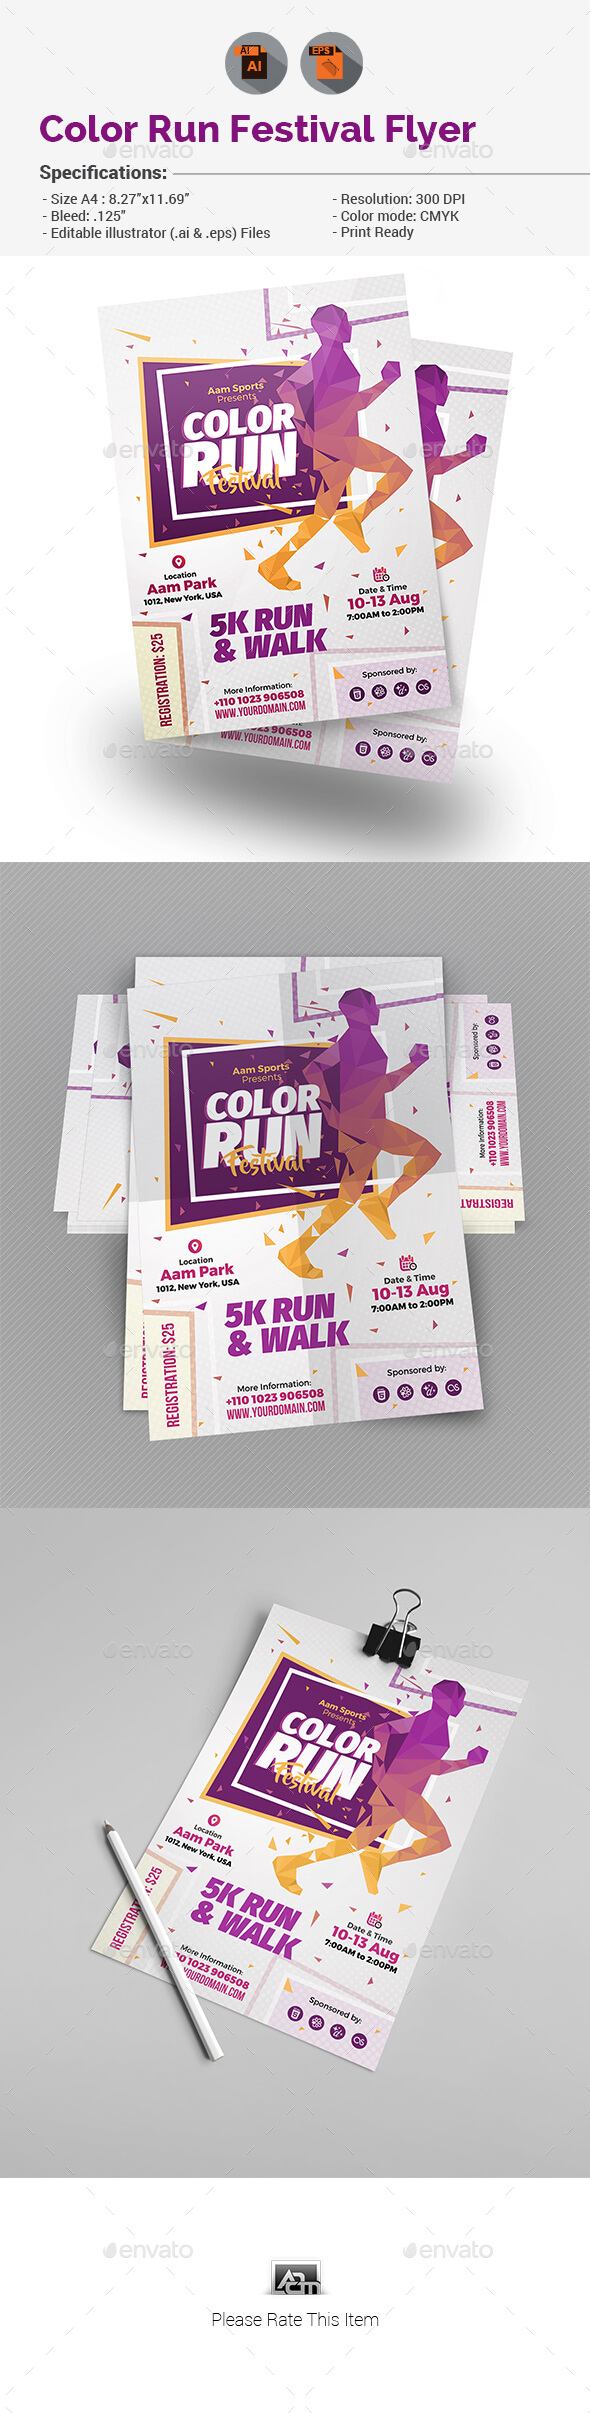 5K Run Graphics, Designs & Templates From Graphicriver Within 5K Flyer Template